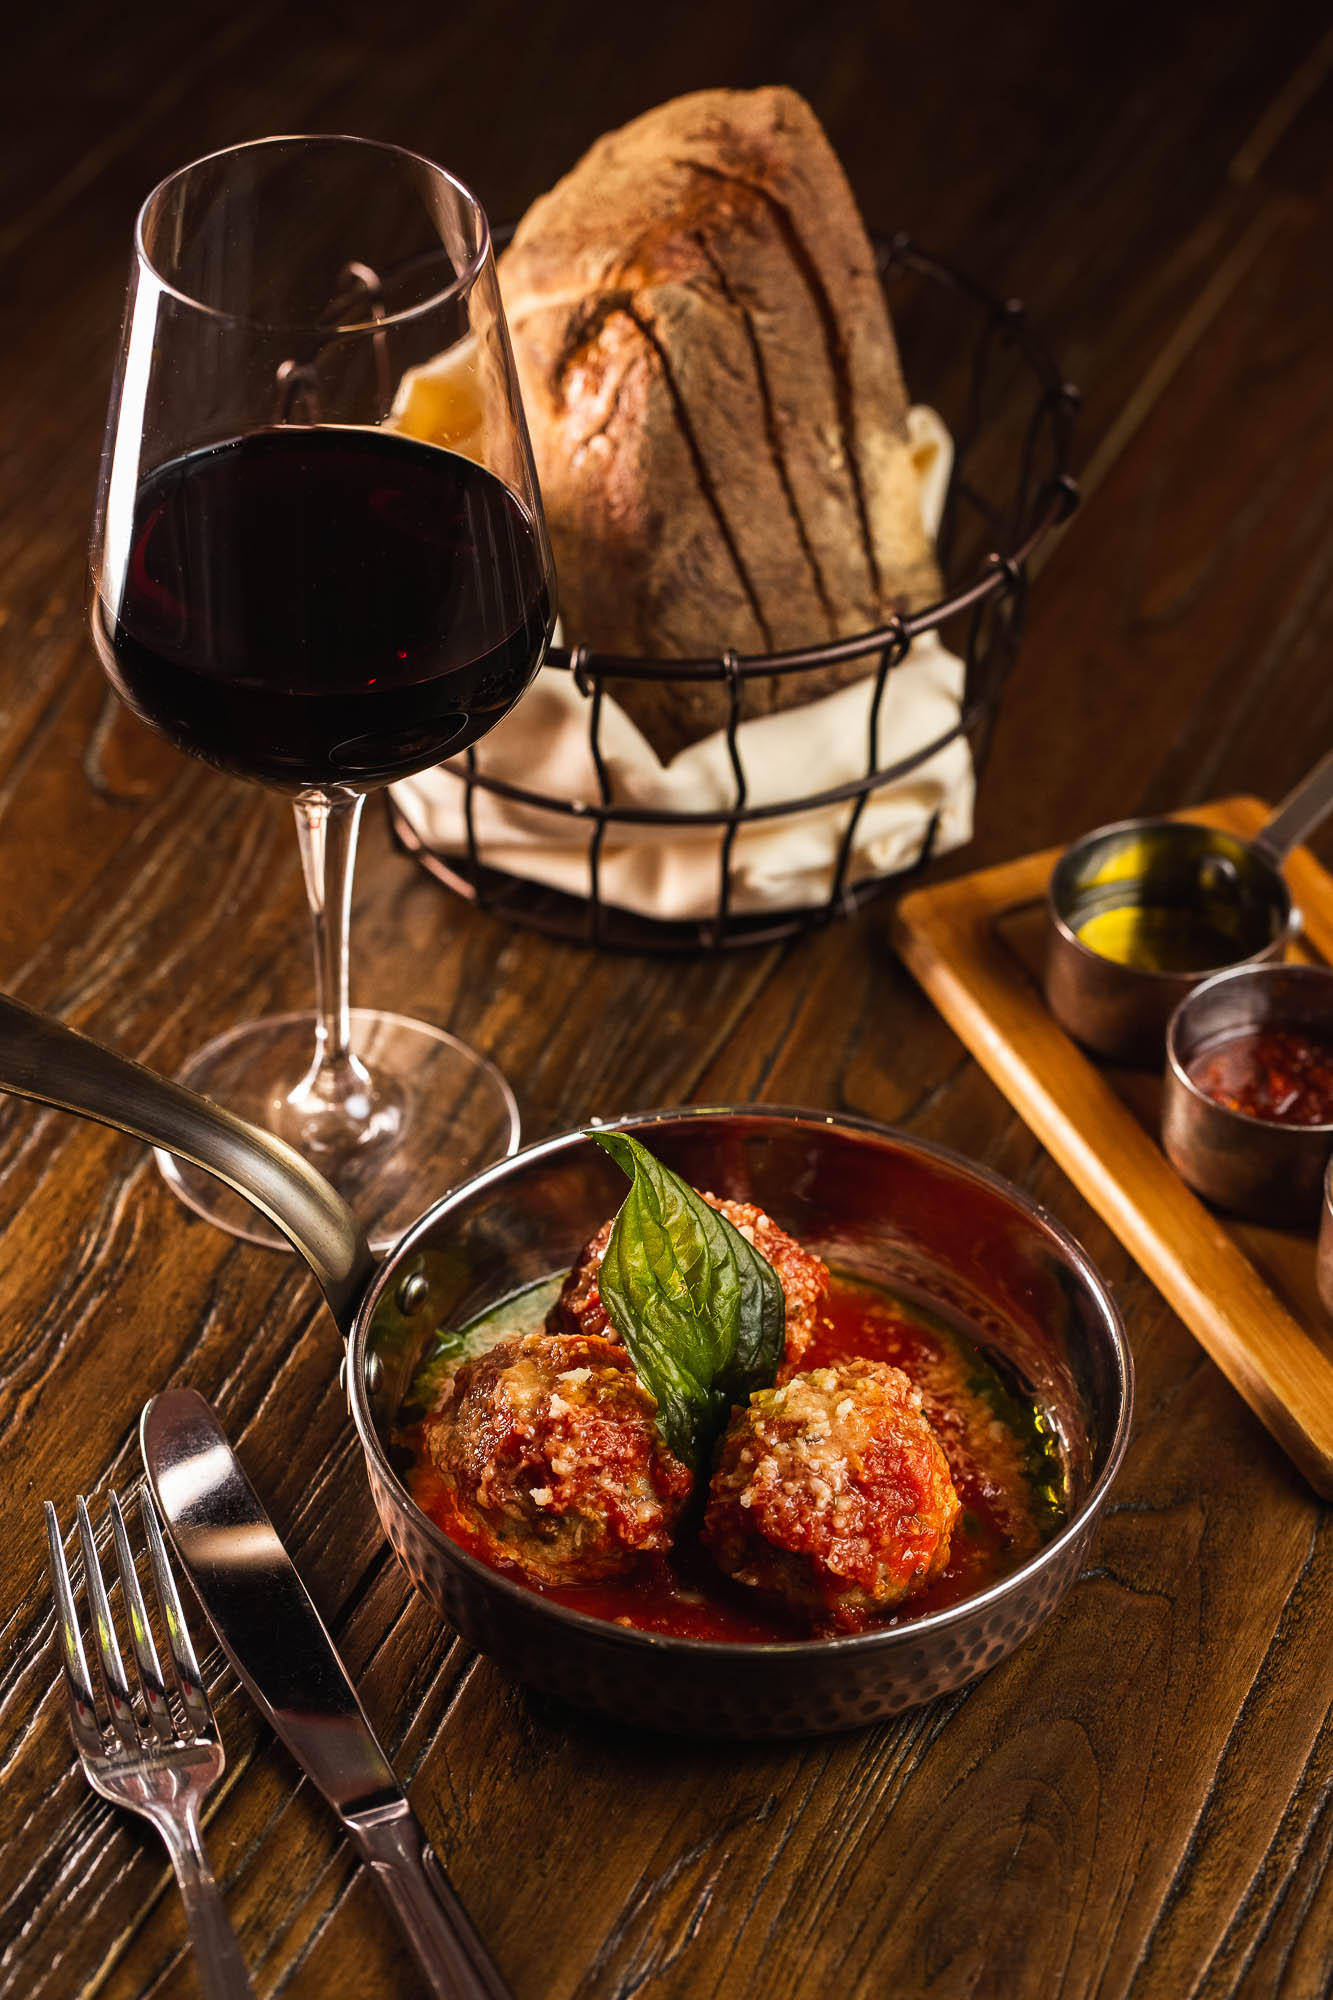 Meatballs and a glass of red wine, bread, and condiments on a table